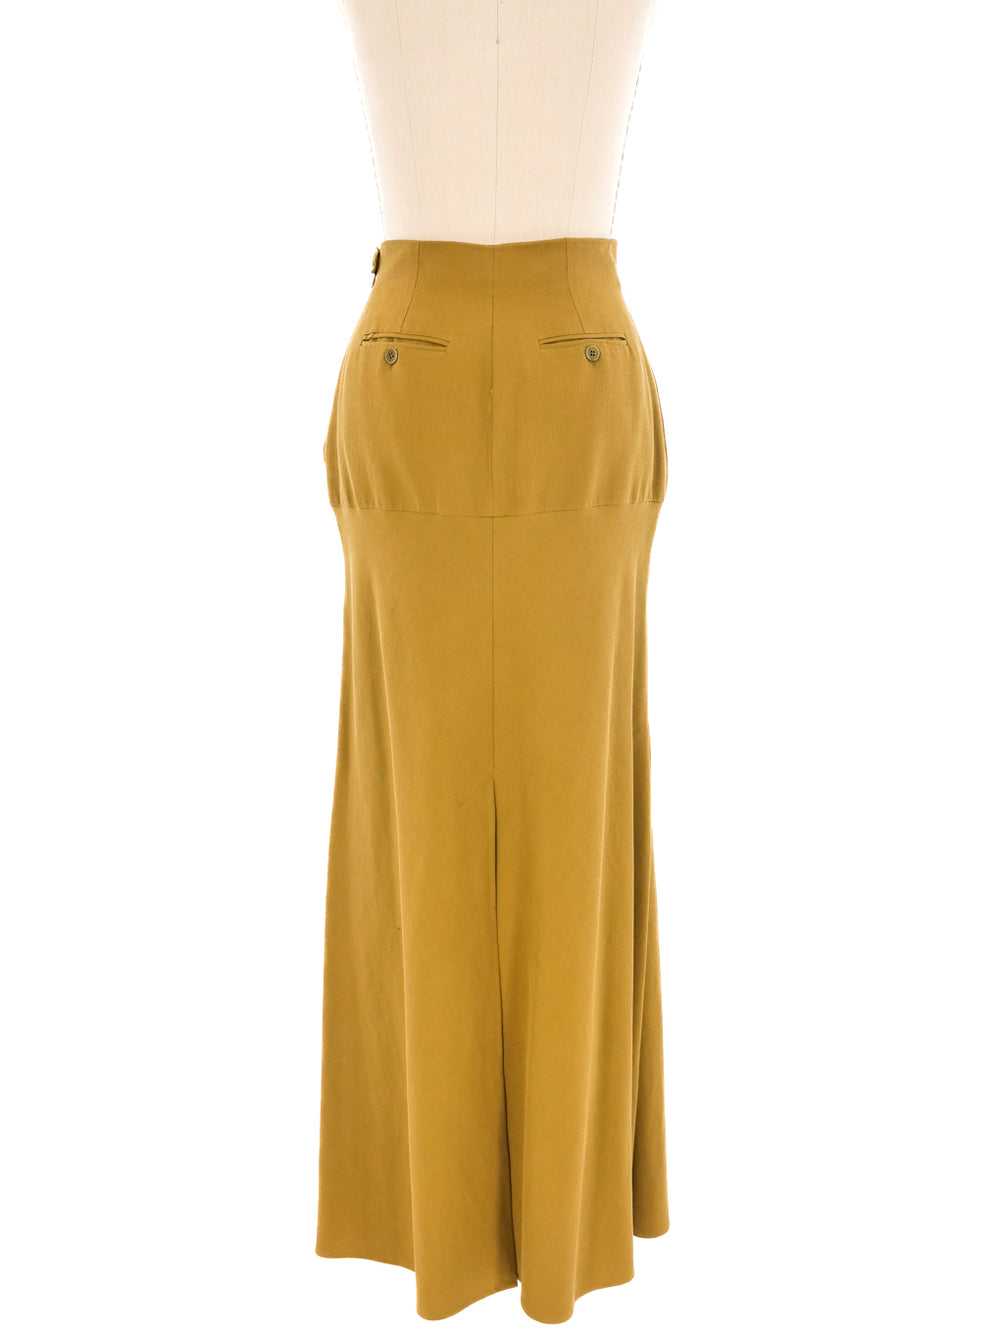 Romeo Gigli Suiting Inspired Maxi Skirt - image 4